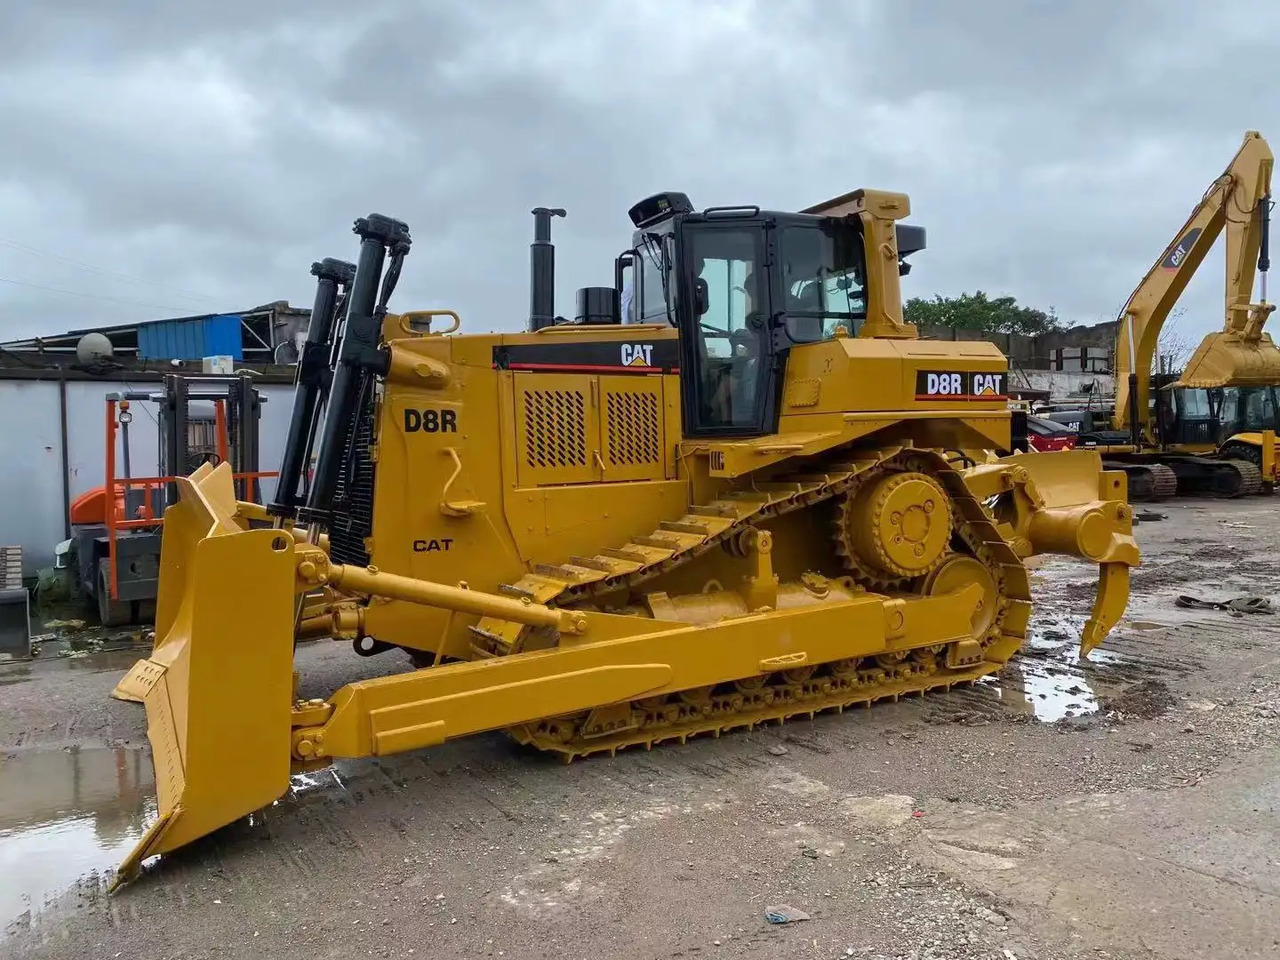 Cheap Japan Used Bulldozer D8R Caterpillar D8r bulldozer CAT d6r d7 d8r d9r bulldozers - Bulldozer: picture 4